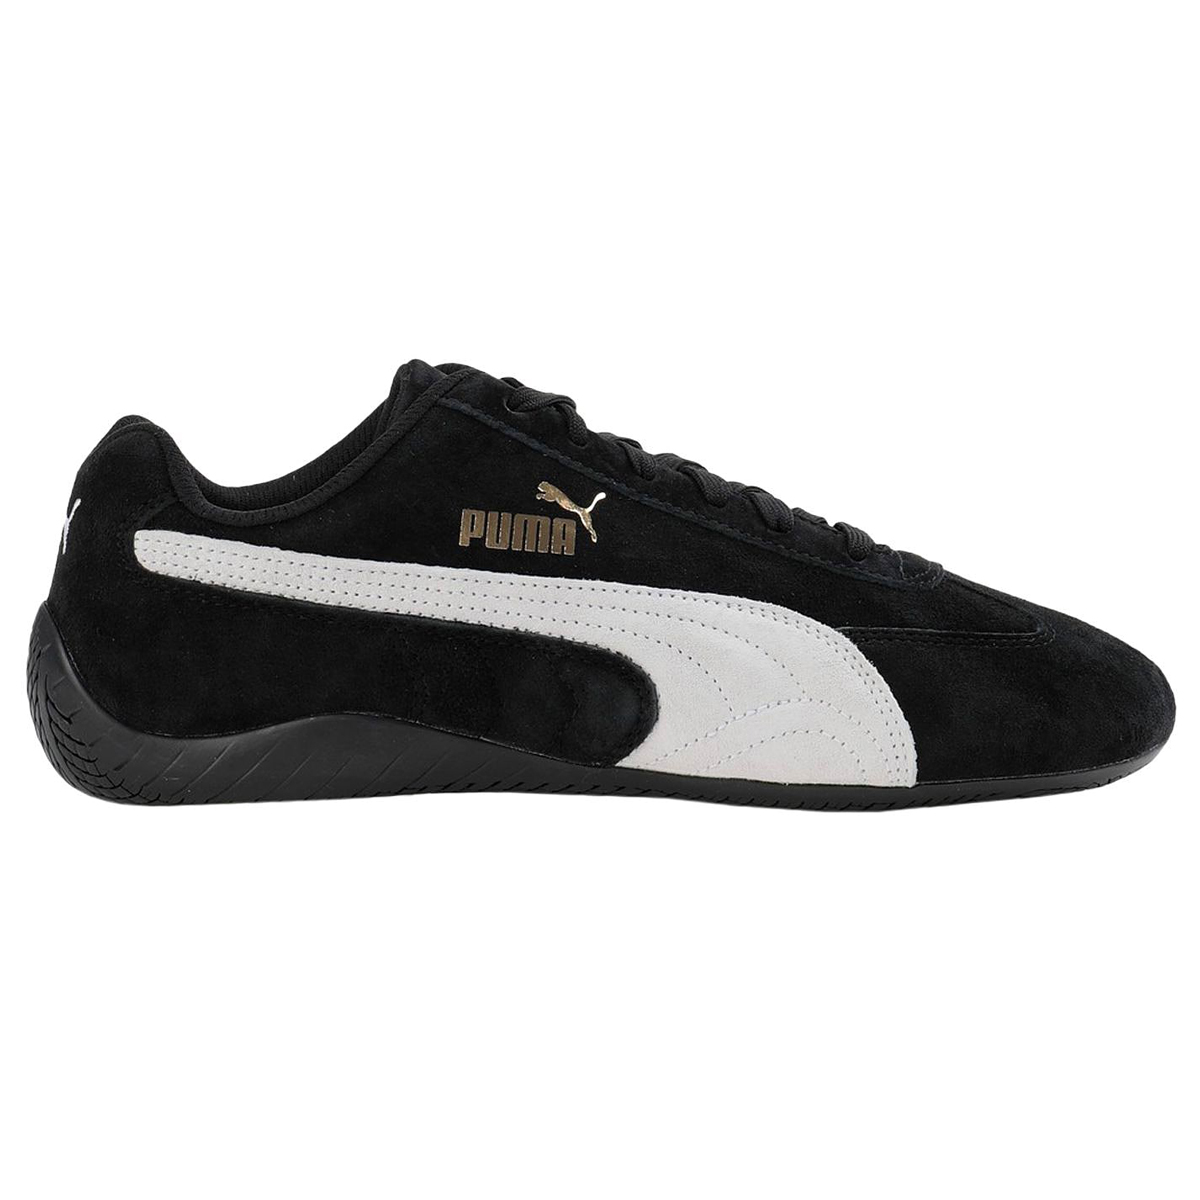 Buy > puma shoes from early 2000s > in stock